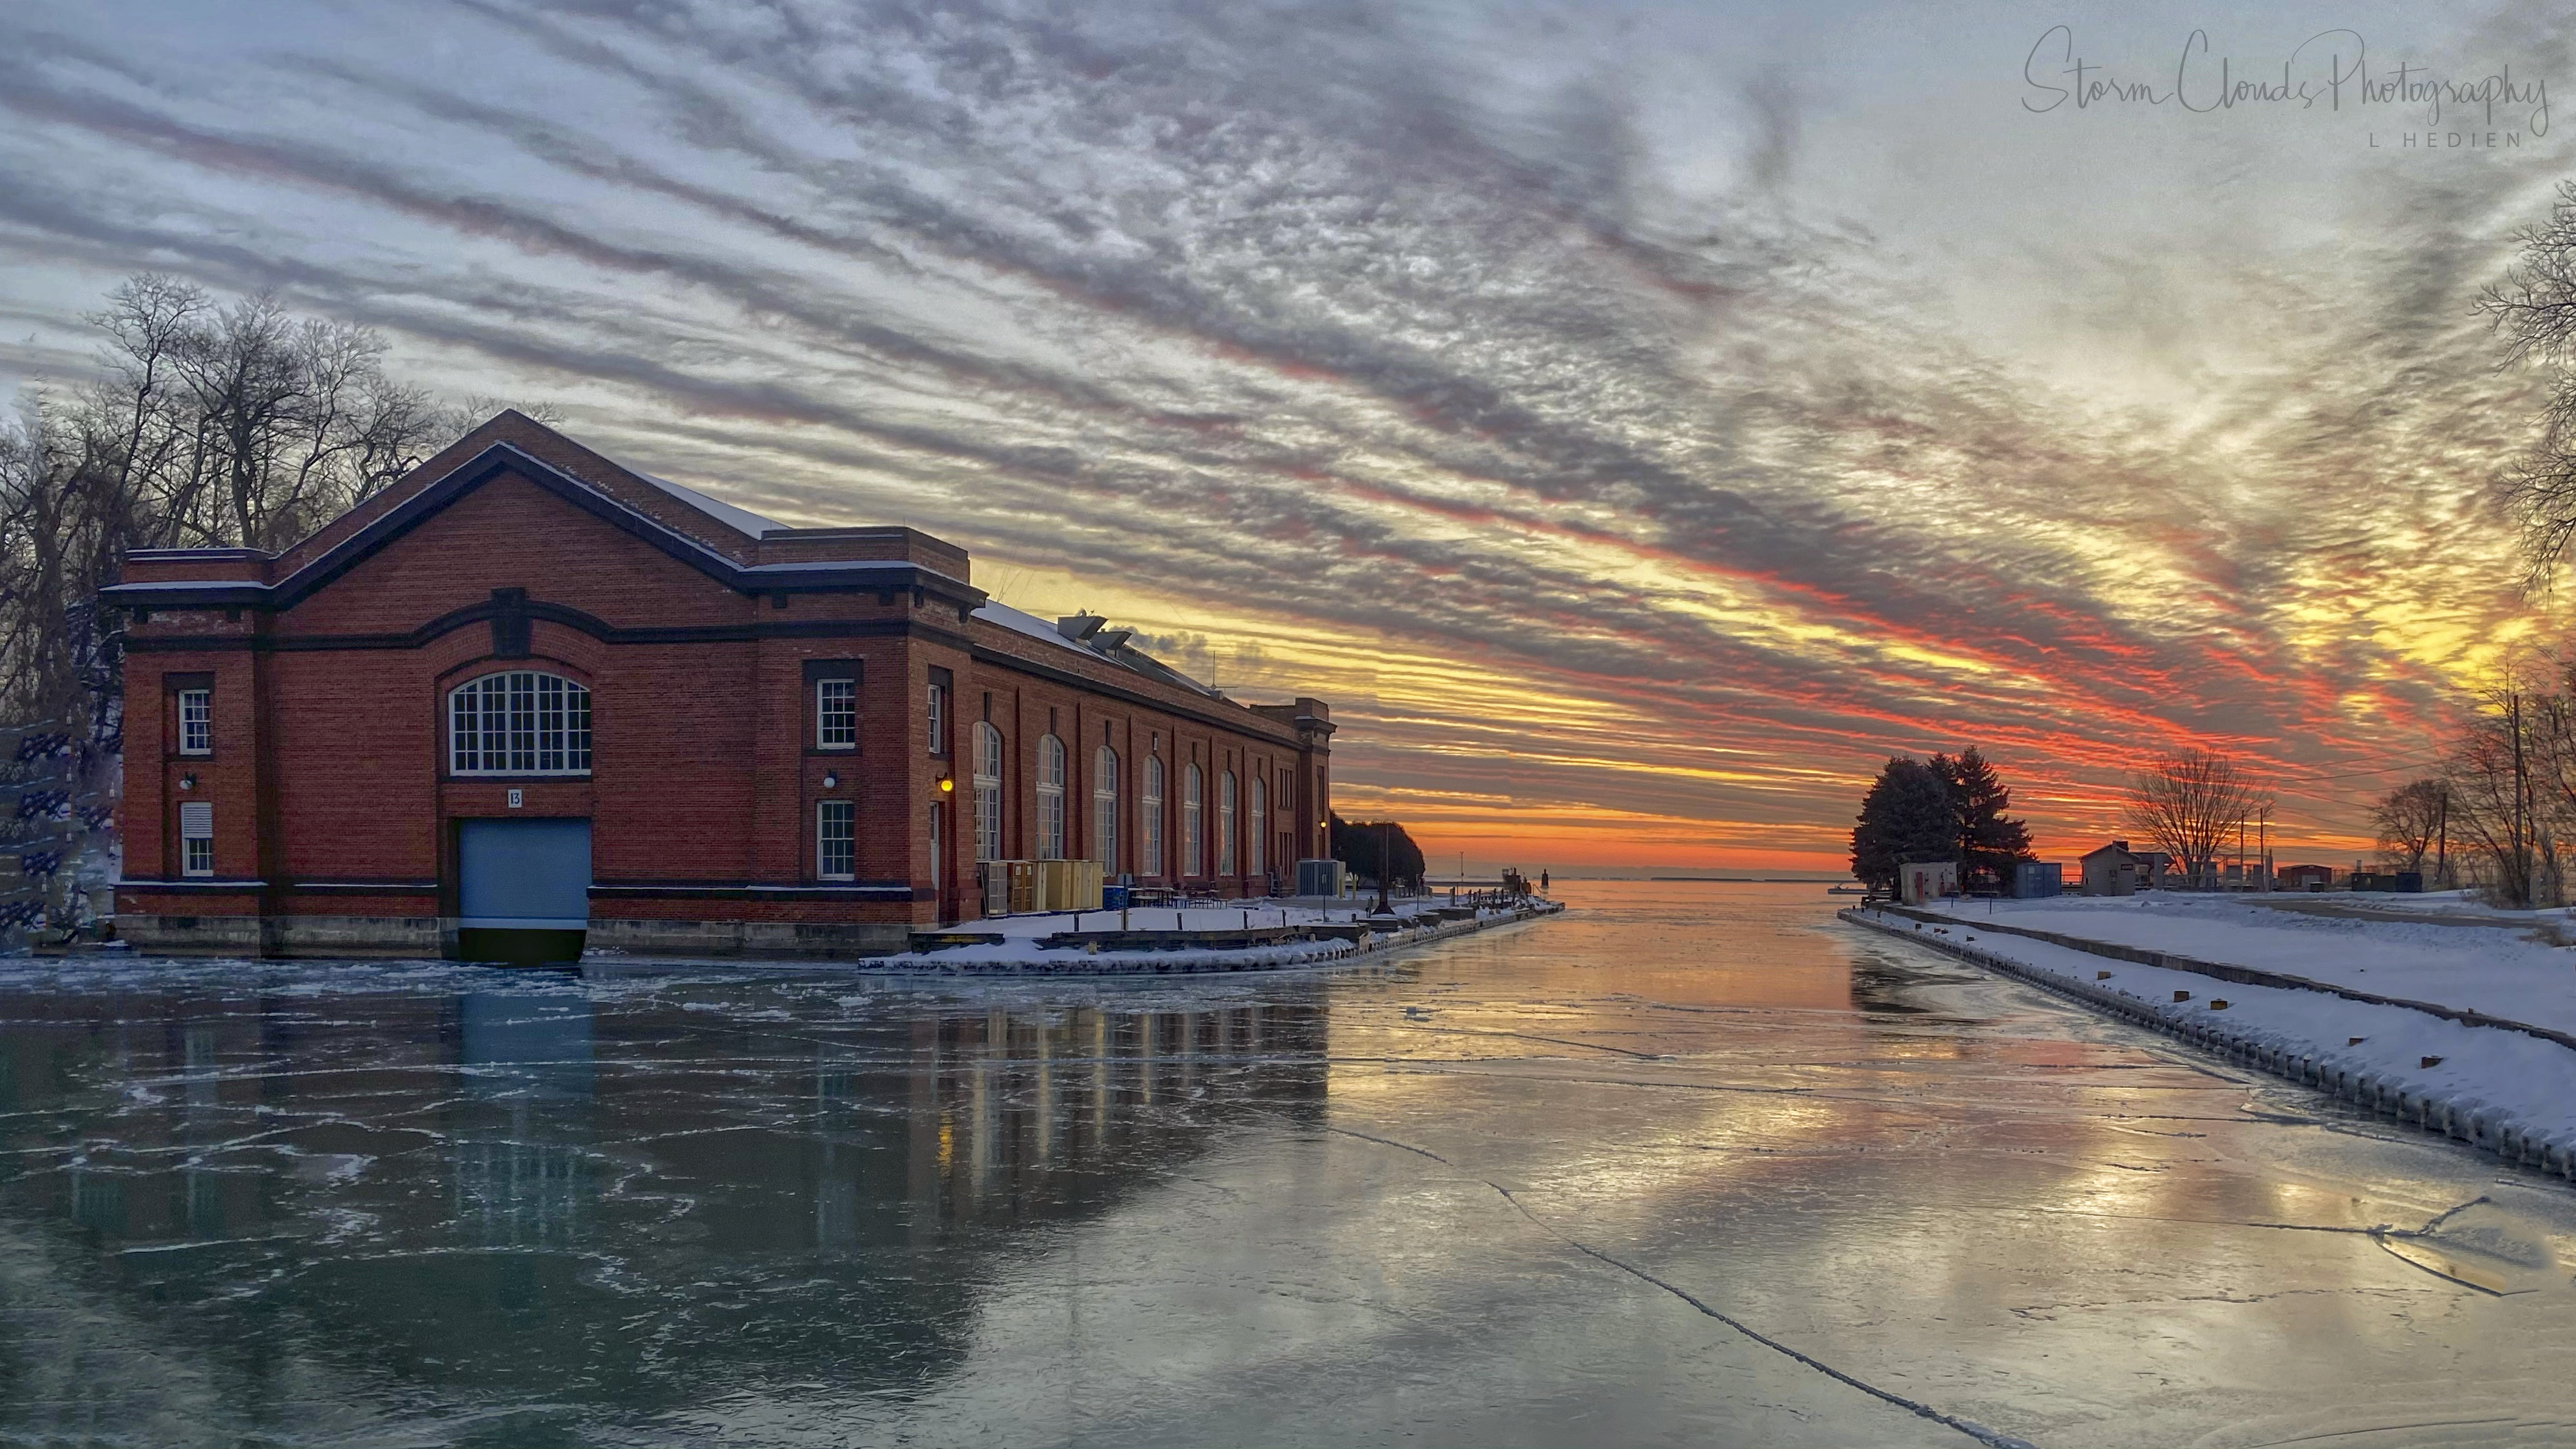 3rd Place Great Lakes Naval Base Illinois on Lake Michigan on a cold winter morning by Laura Hedien @lhedien